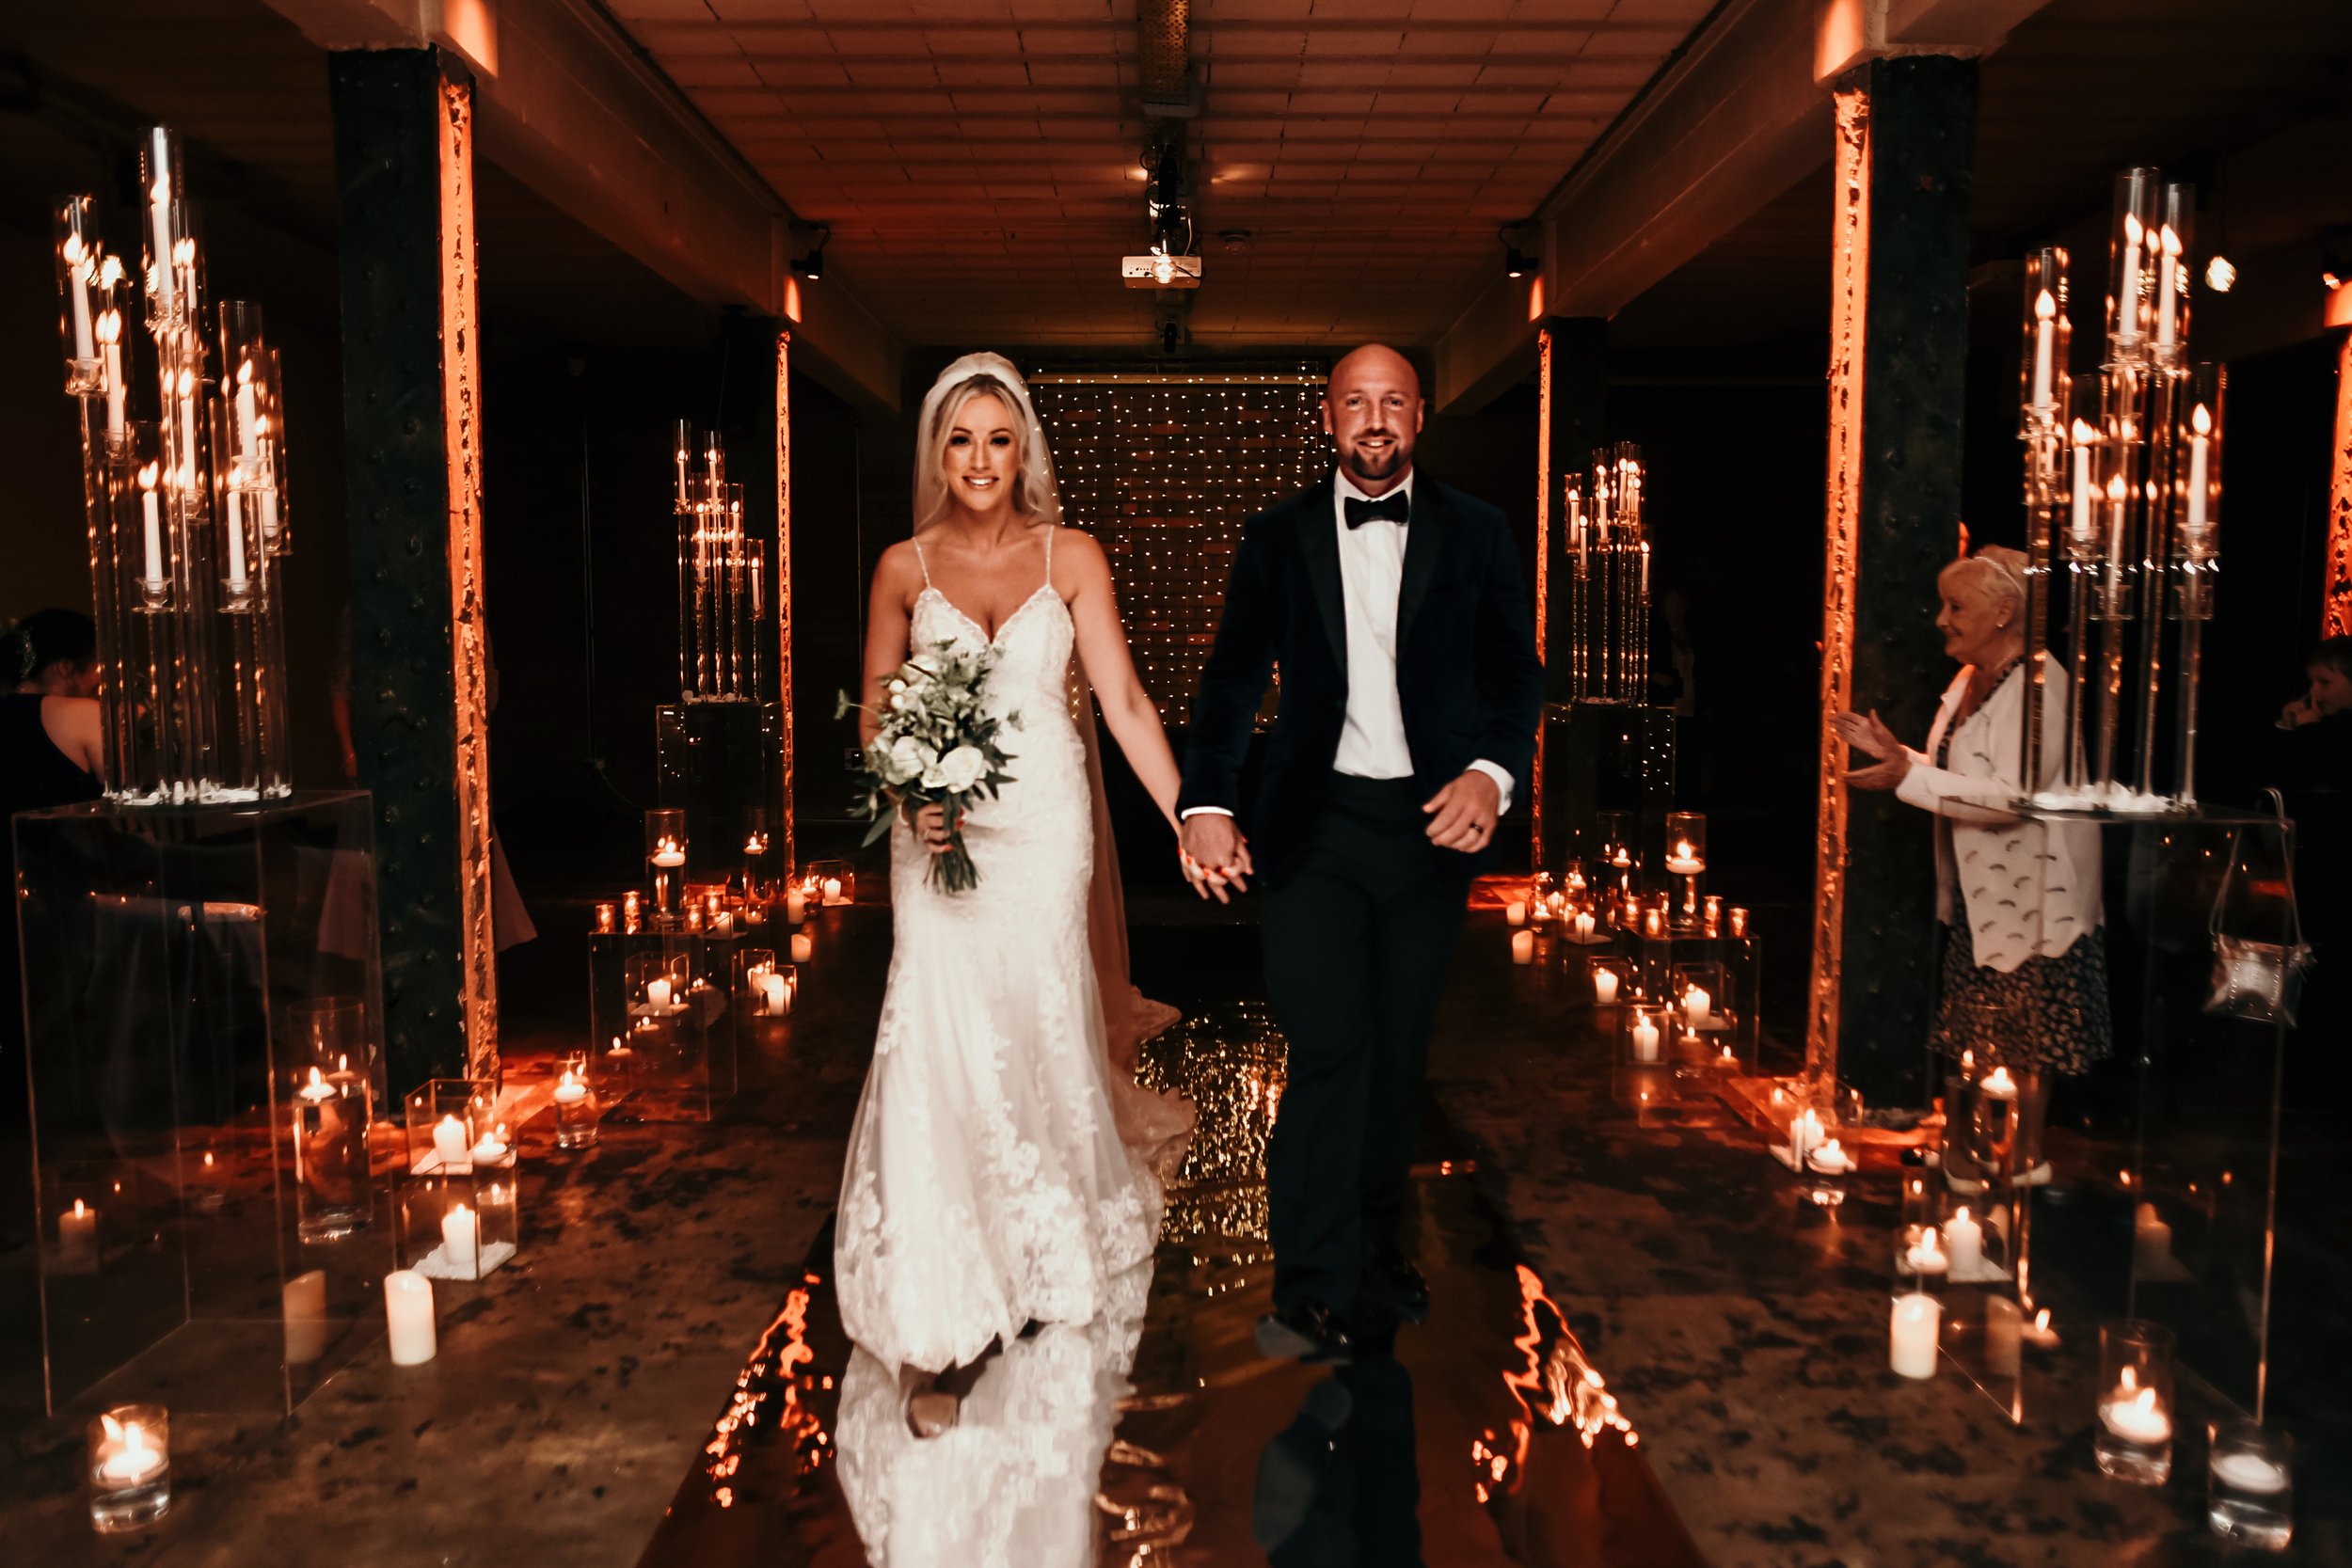  Photographer Credit: Kerry Lu  Bride and groom have been photographed walking back up the aisle within the stunning Victoria Warehouse venue. The room has been dressed with a copper panel down the aisle for the couple to walk on and either side ther